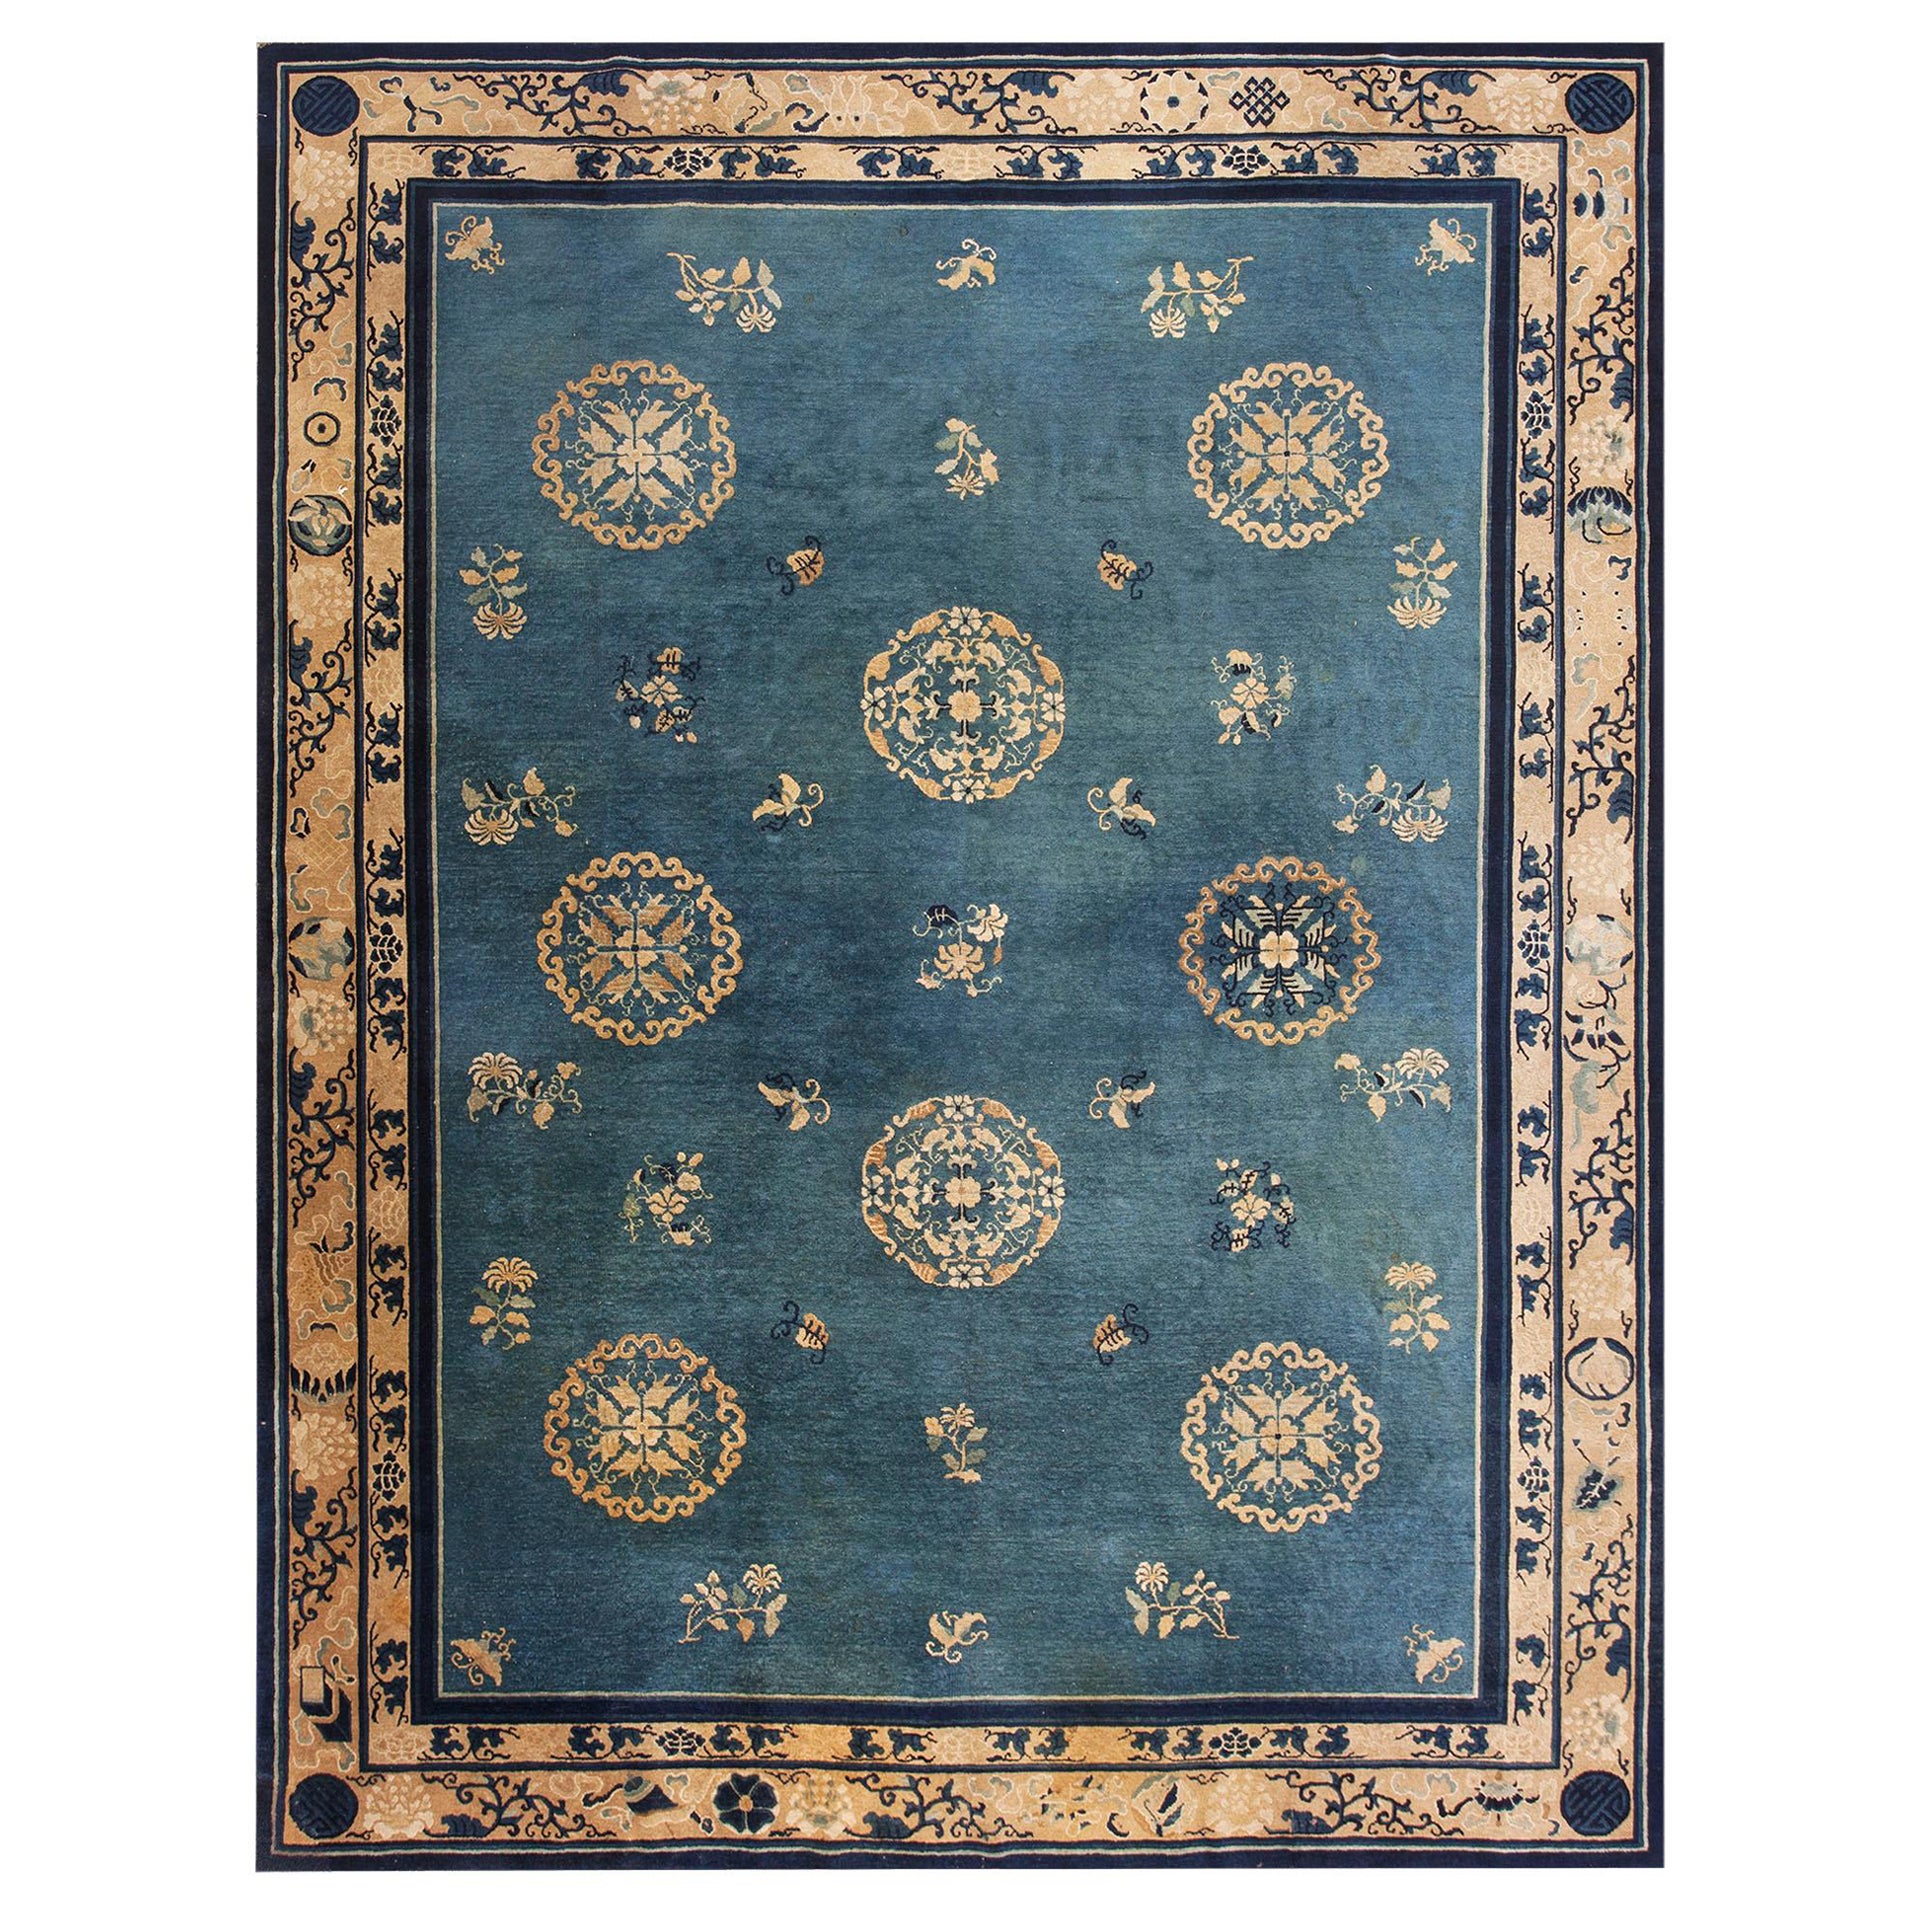 Early 20th Century Chinese Peking Carpet ( 8'2" X 10'8" - 245 X 325 ) For Sale